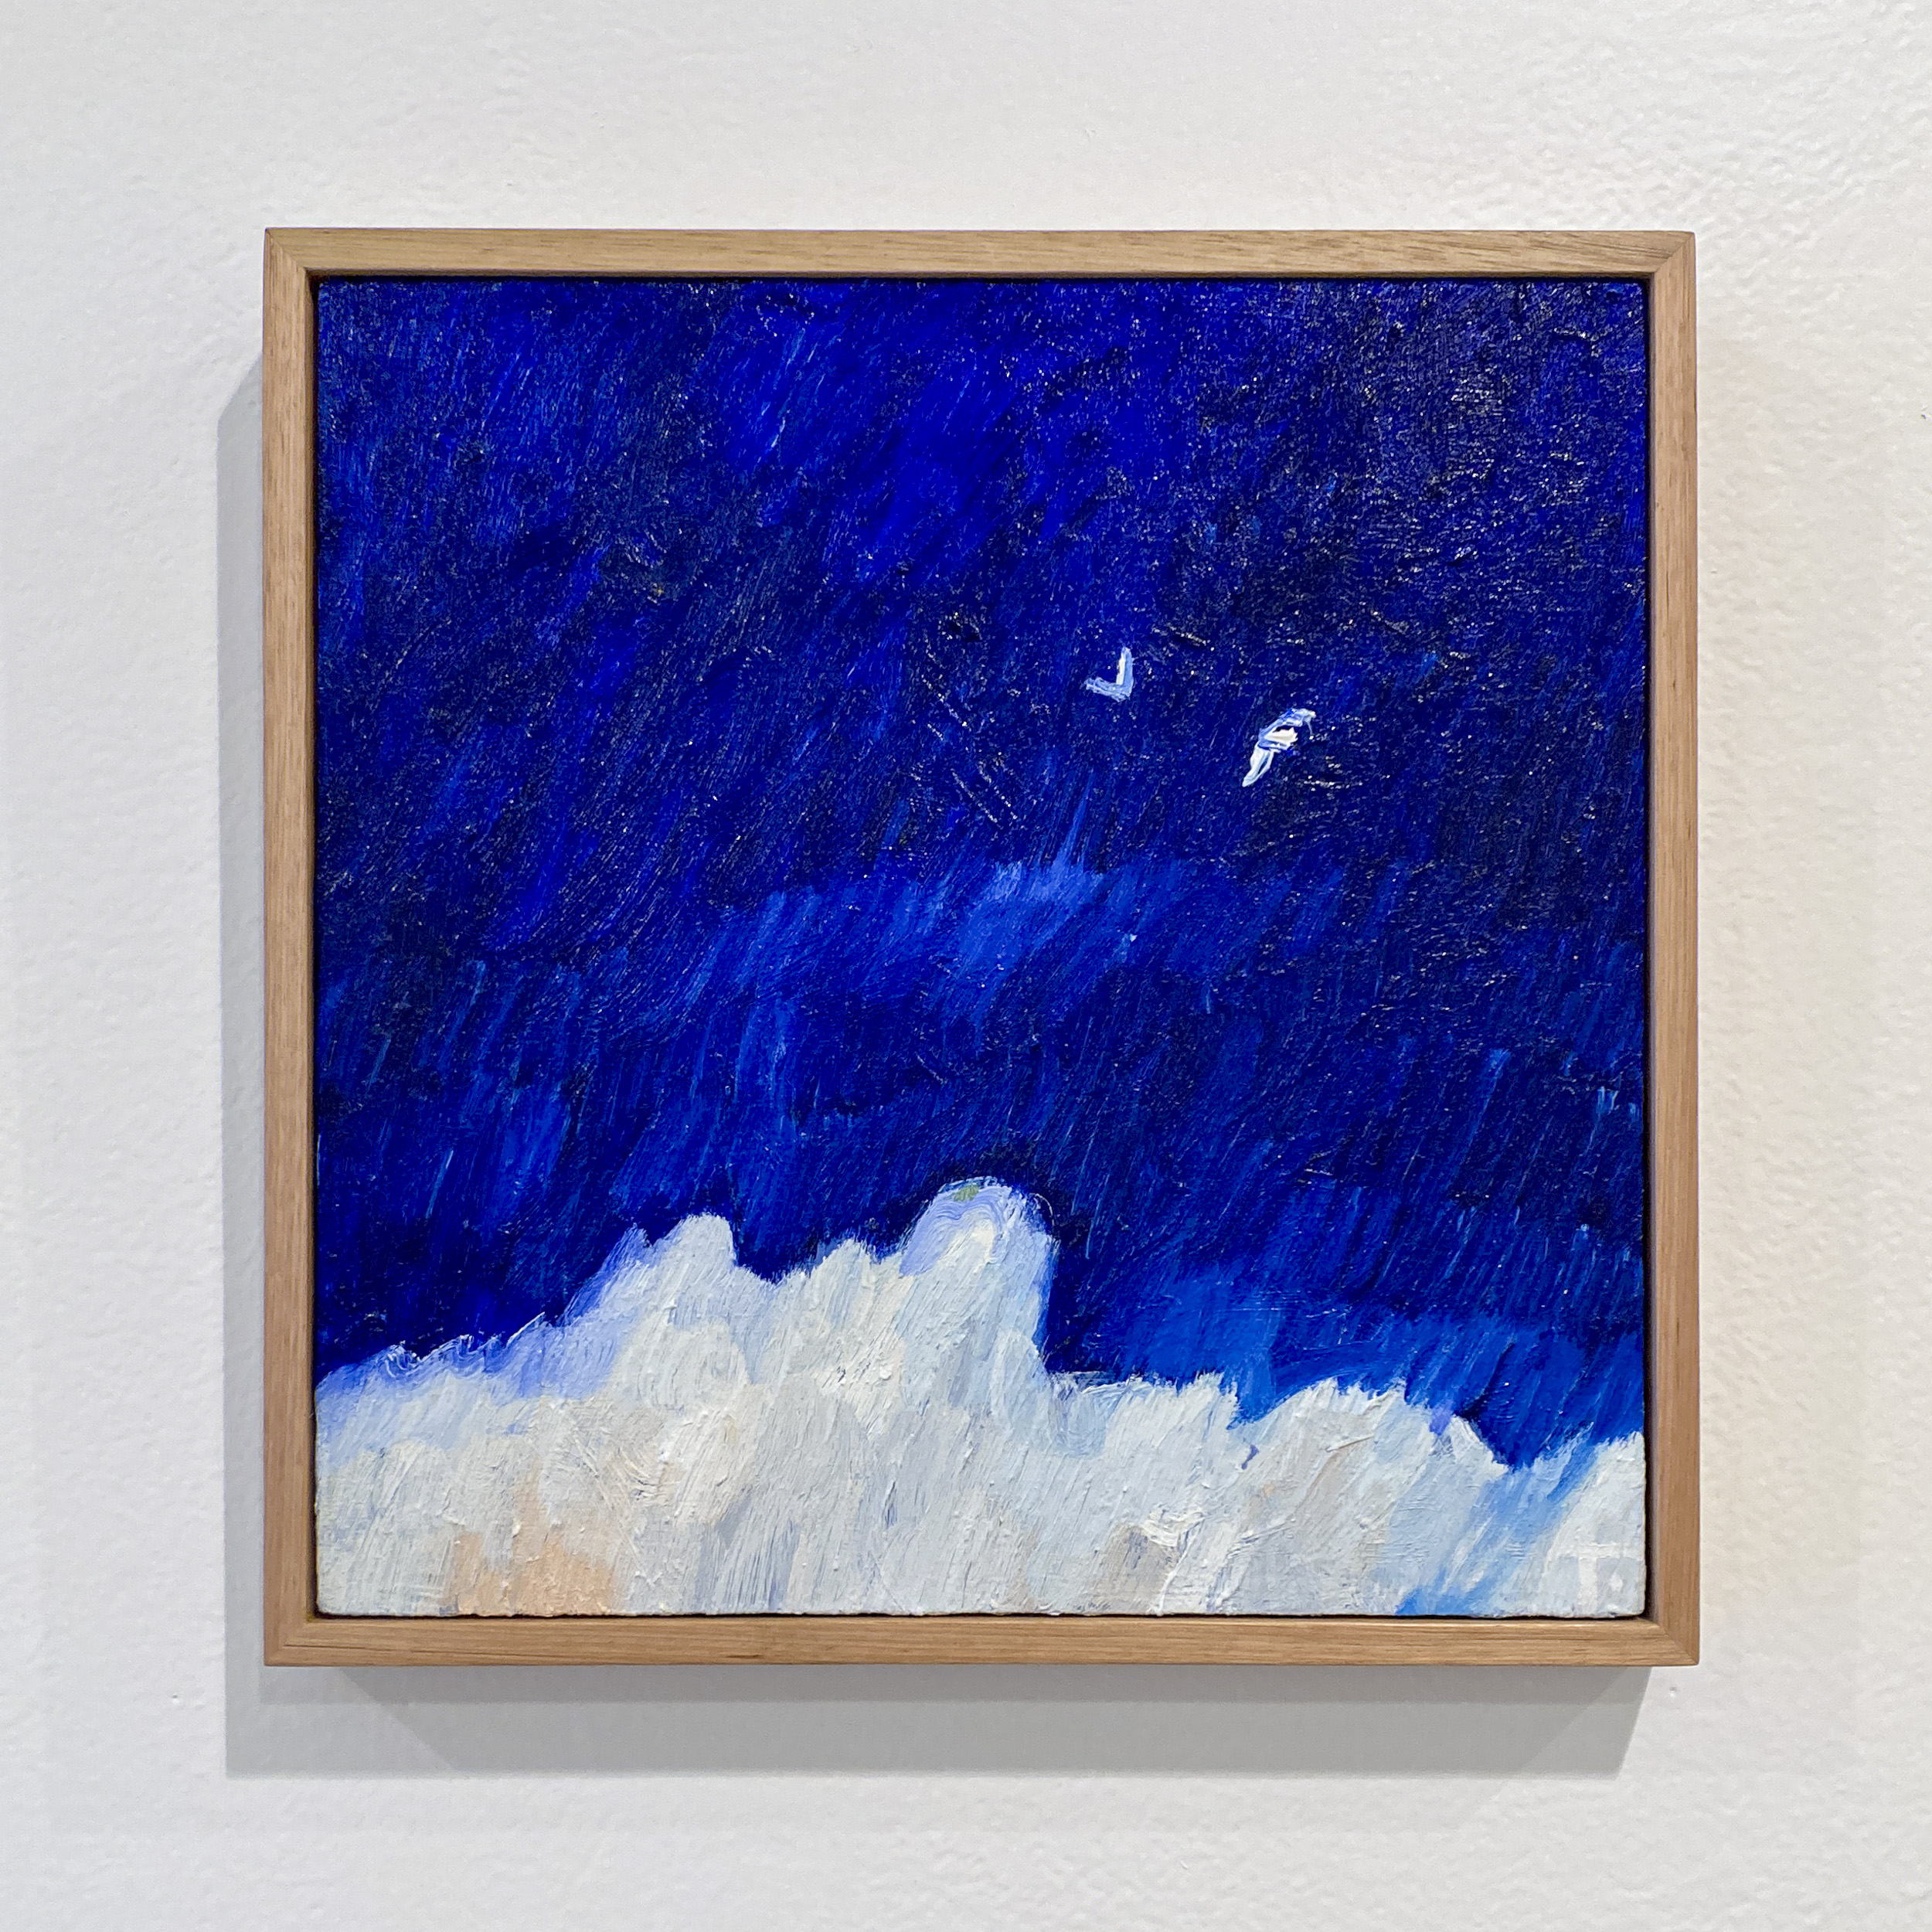 A square oil painting with bright blue sky and two small white birds flying above what might be white clouds below